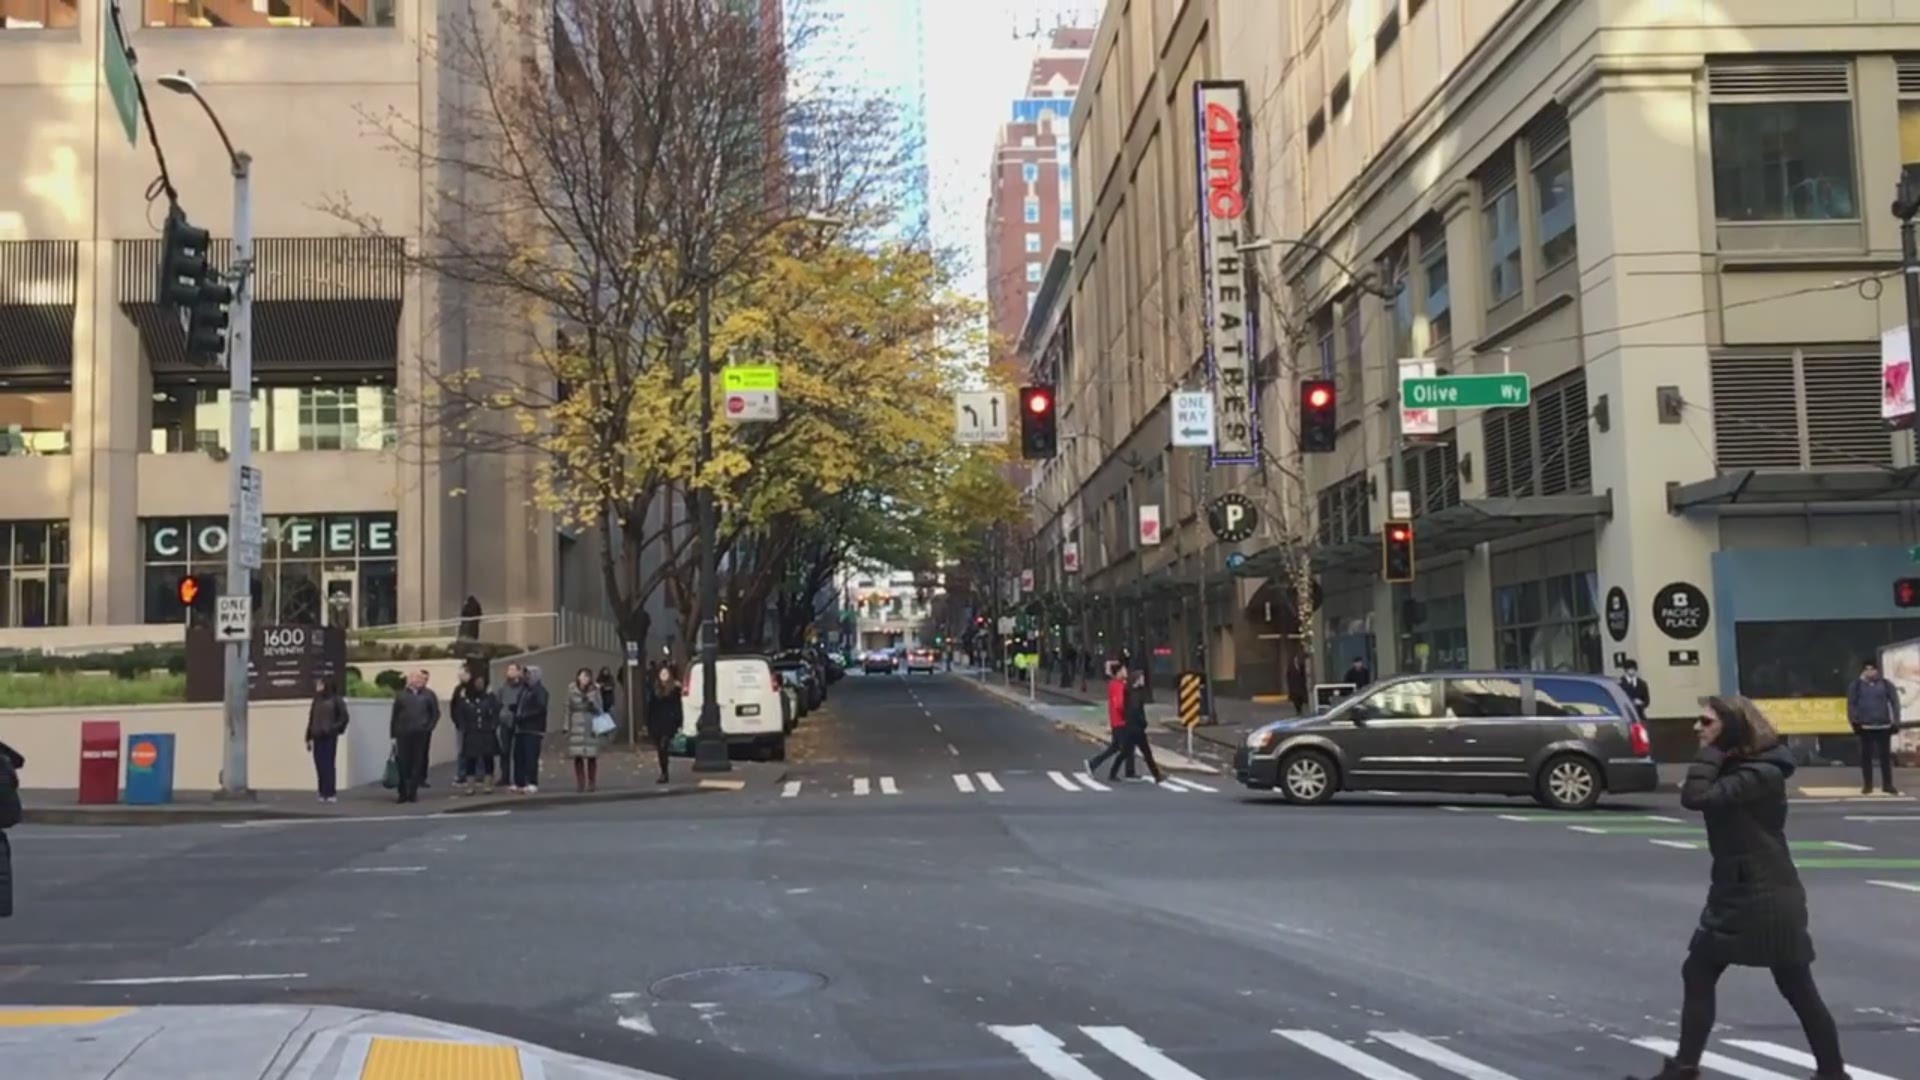 Here's an example of how leading pedestrian intervals work at 7th Avenue and Olive Way in downtown Seattle. Pedestrians get a few seconds head start in the crosswalk before turning traffic gets a green light.